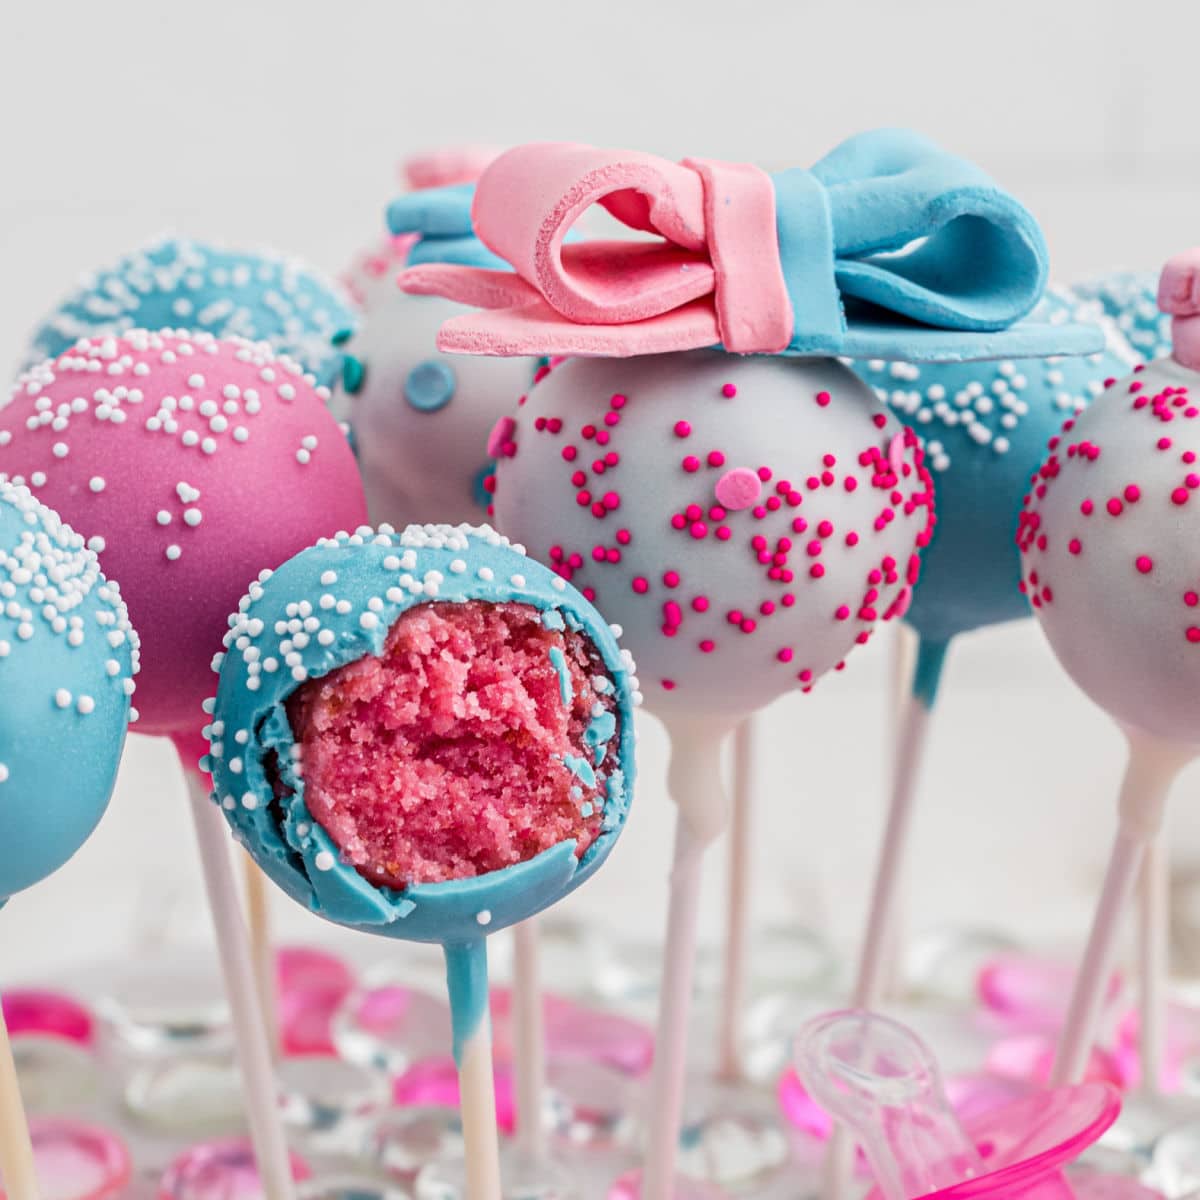 45 Delicious Gender Reveal Food Ideas to Share Your Exciting News